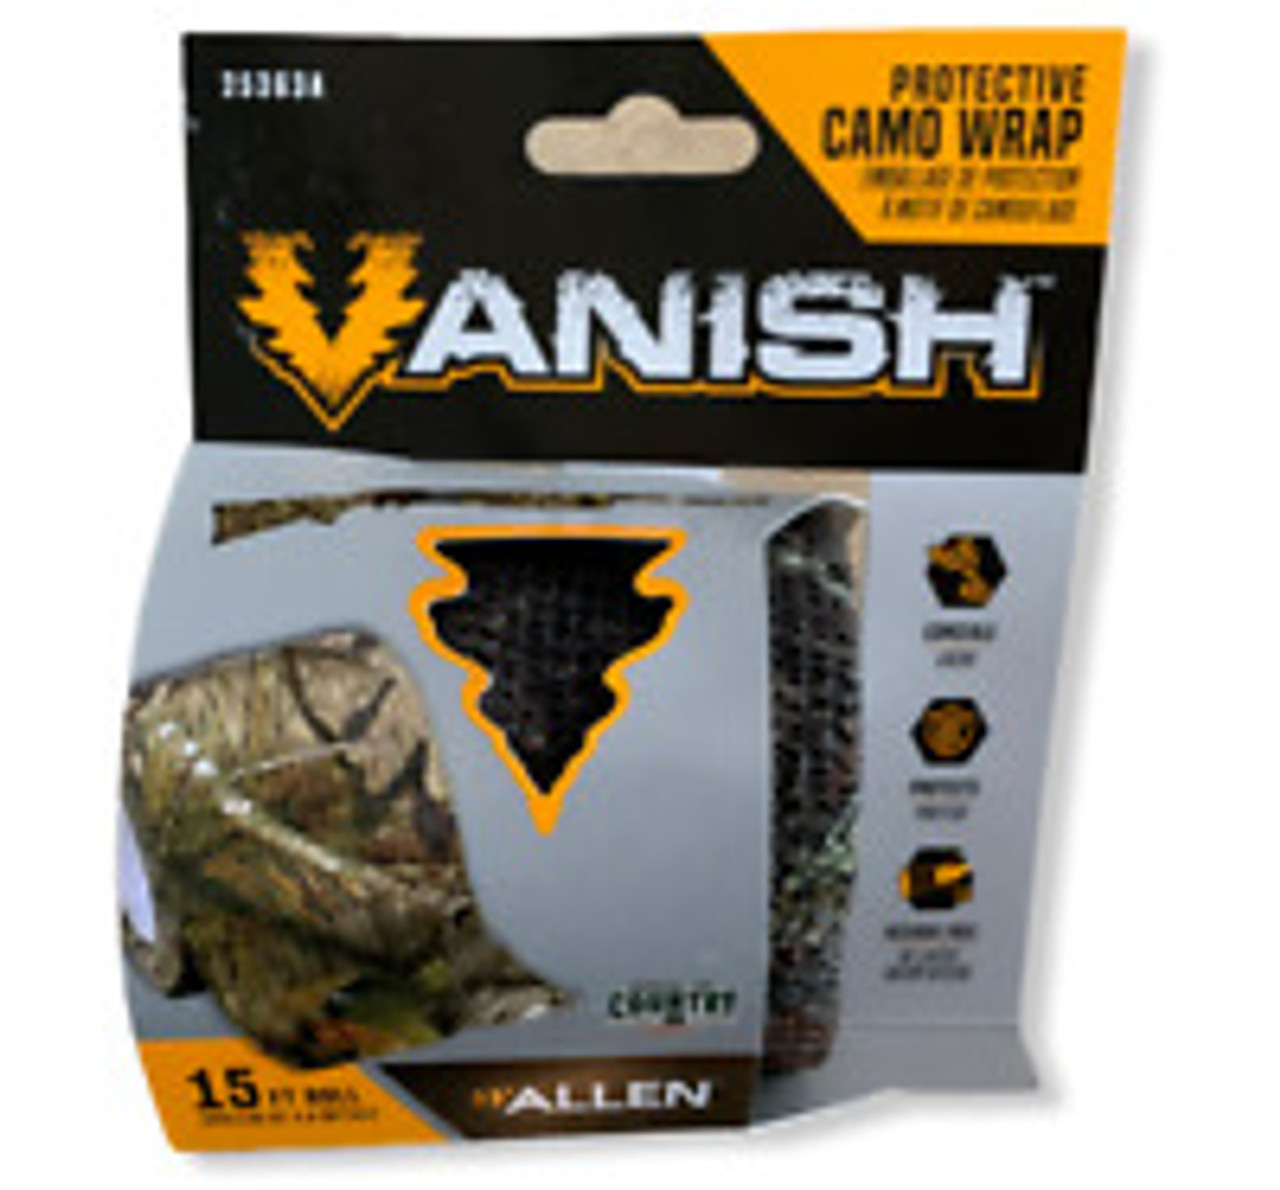 Vanish™ protective camo wrap is the ultimate method to conceal and protect your outdoor gear without damage. It is easy to use, residue free, installs easily, is removable and helps improve grip on smooth surfaces. The protective camo wrap is available in a variety of patterns suited for your concealment needs such as Mossy Oak® Break-Up Country™, Obsession™ and Realtree® Max-5™.

Product Features
PROTECTIVE CAMO WRAP: Can be used to conceal & protect your outdoor gear from damage
HIGHLY RESISTANT: Made of a polyester/spandex blend to provide optimum resistance
INSULATION: Improves grip while insulating from hot/cold
WASHABLE & REUSABLE: Can be washed & reused for multiple uses
FULL COVERAGE: One roll of fabric provides enough material to cover a shotgun, rifle, bow, or crossbow
Realtree Edge® Camo: Designed with Realtree Edge® camo to blend in with your natural surroundings